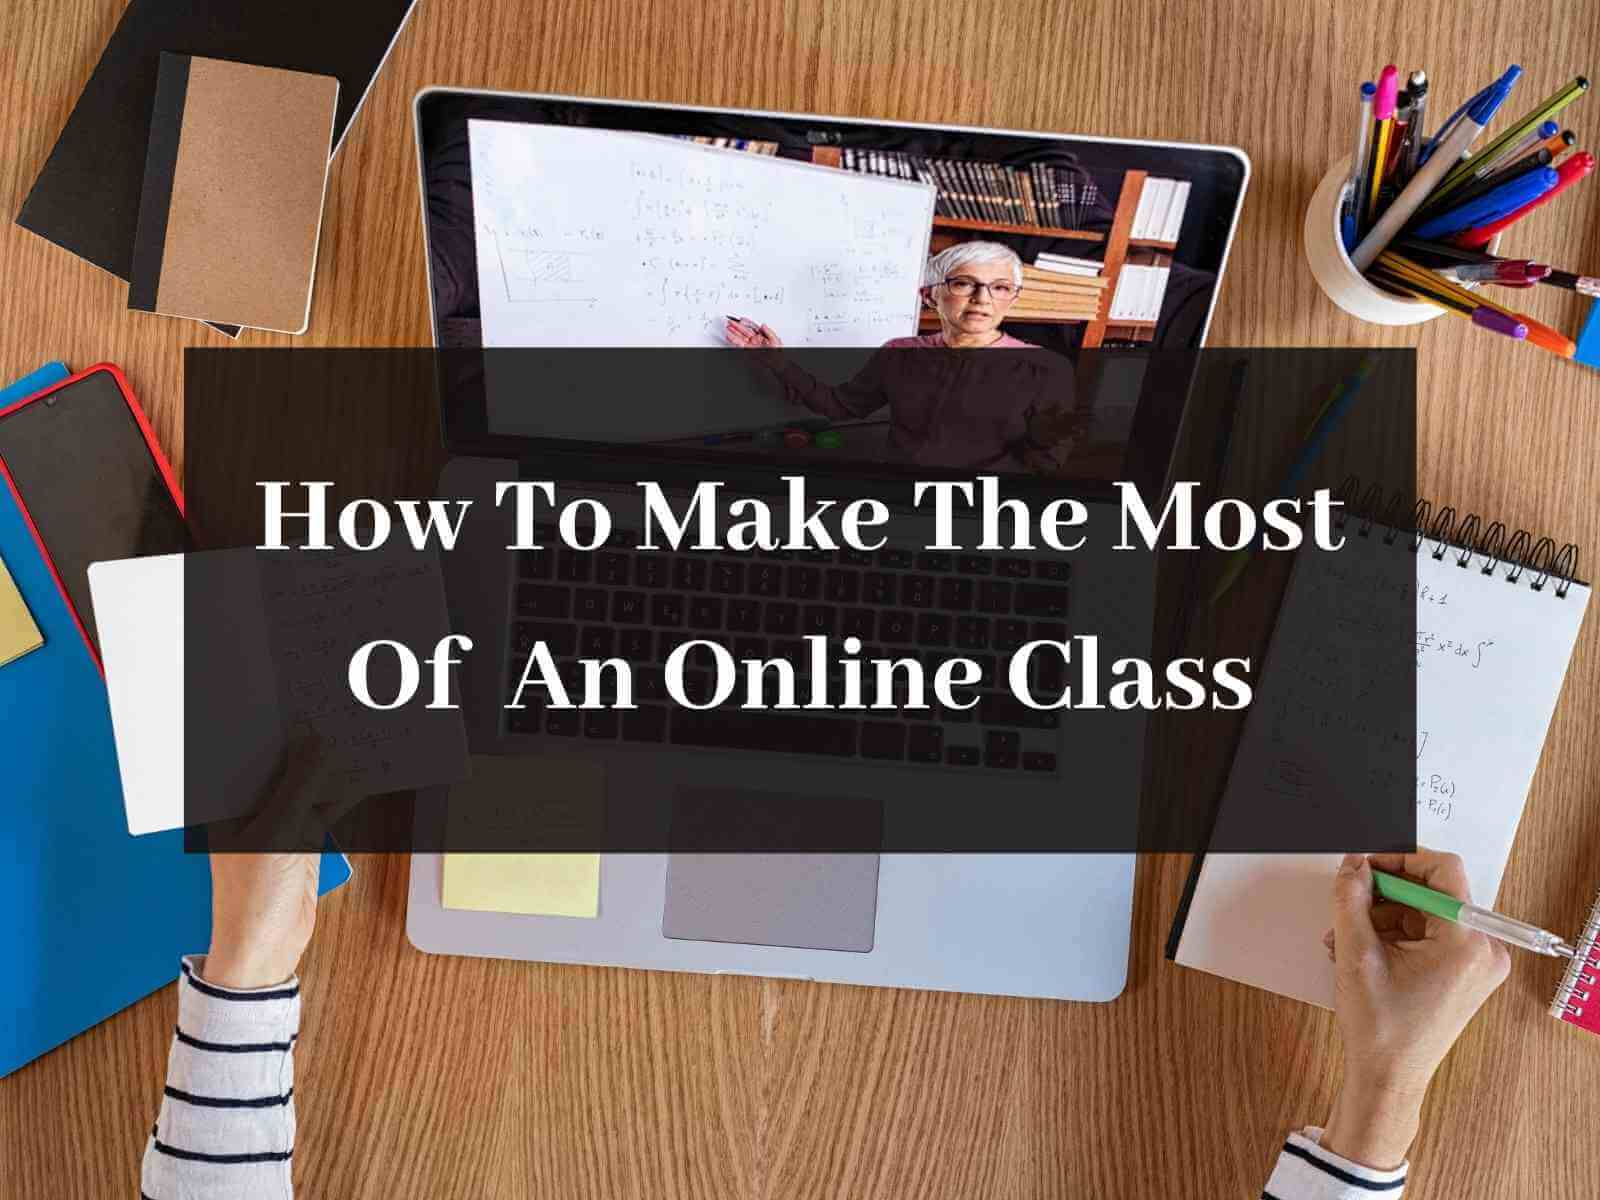 How-To-Make-The-Most-Of-An-Online-Class